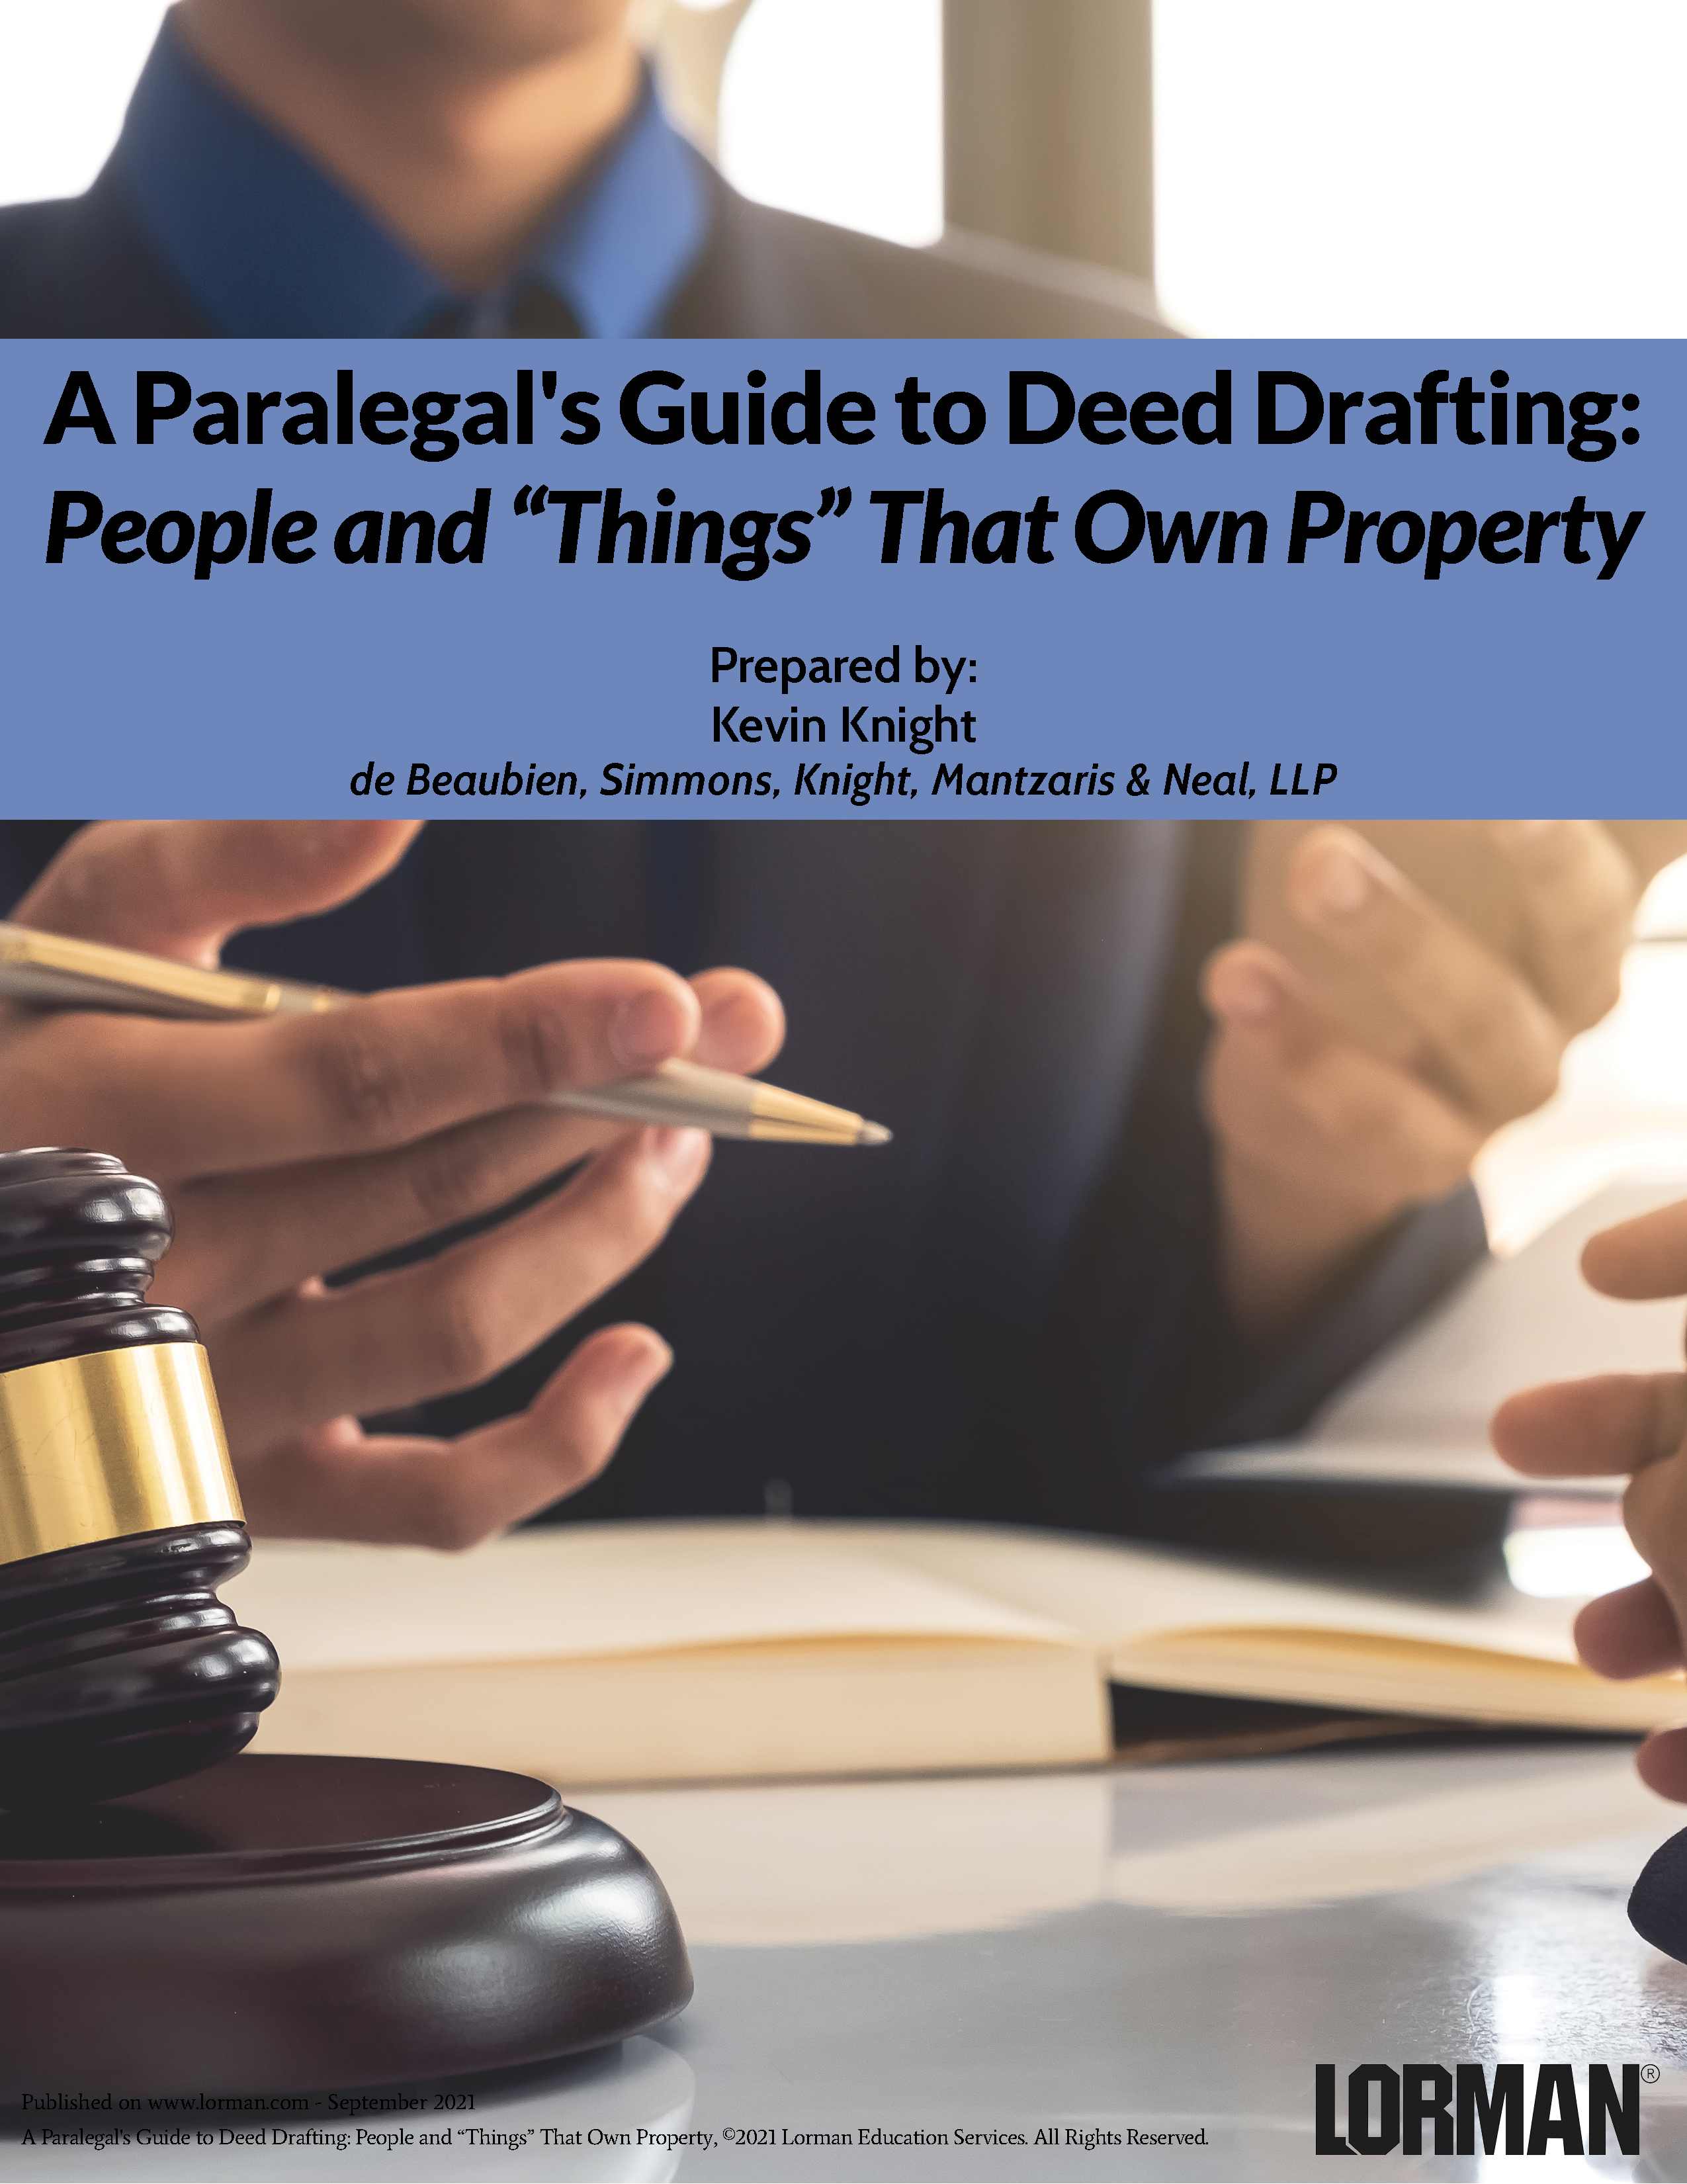 A Paralegal's Guide to Deed Drafting: People and “Things” That Own Property